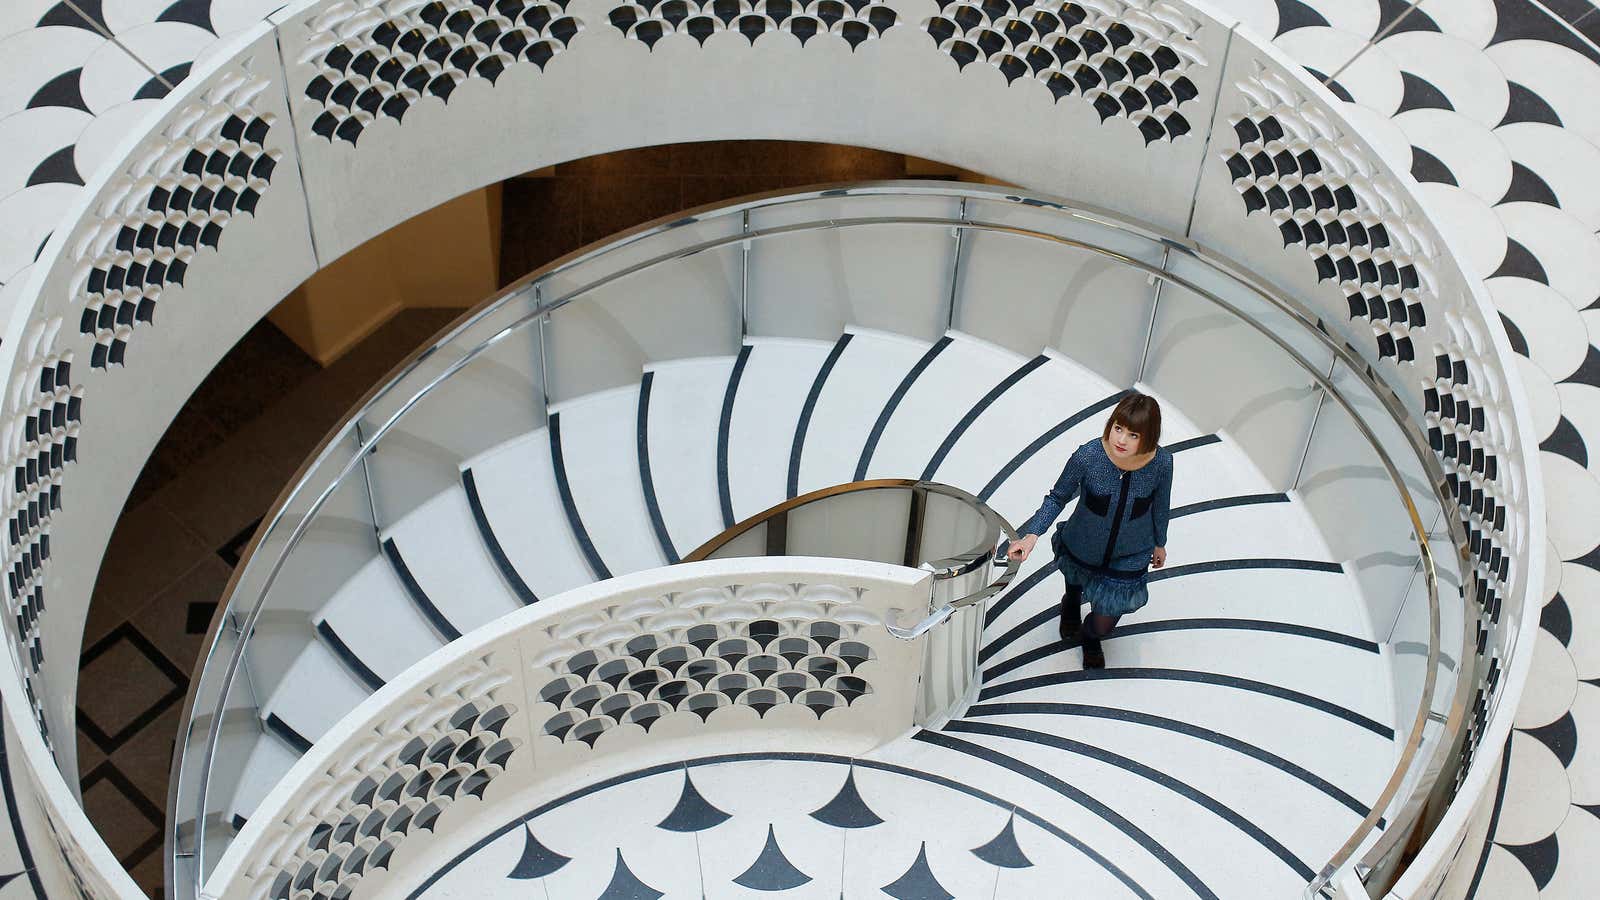 A gallery assistant poses for photographs on the new spiral staircase at Tate Britain in central London November 18, 2013. The 45 million pounds ($72.4…